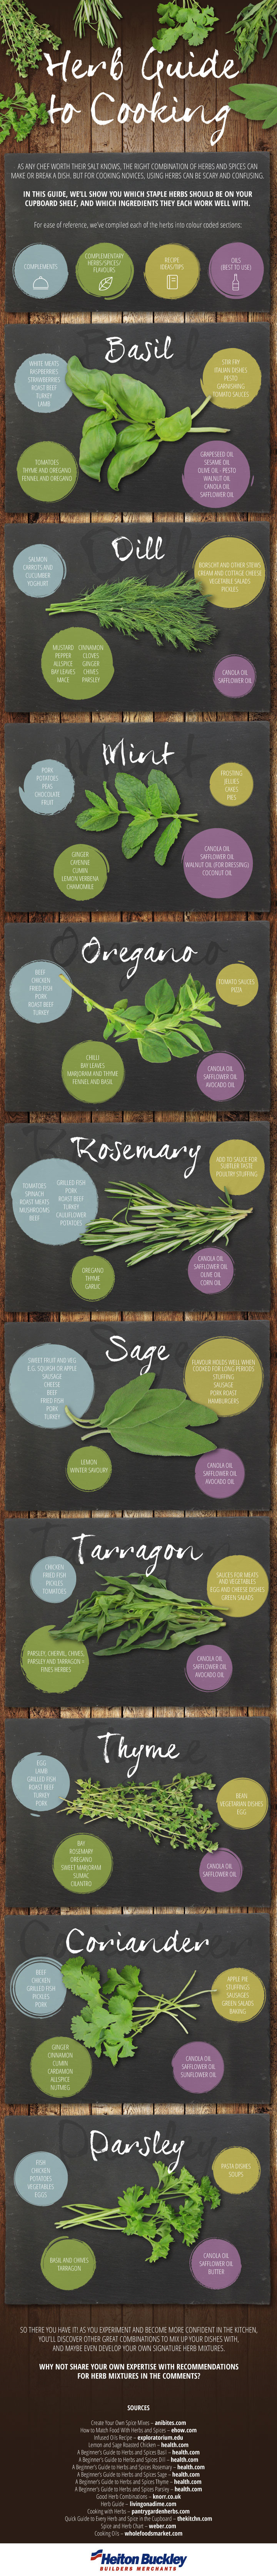 Guide to Using Herbs